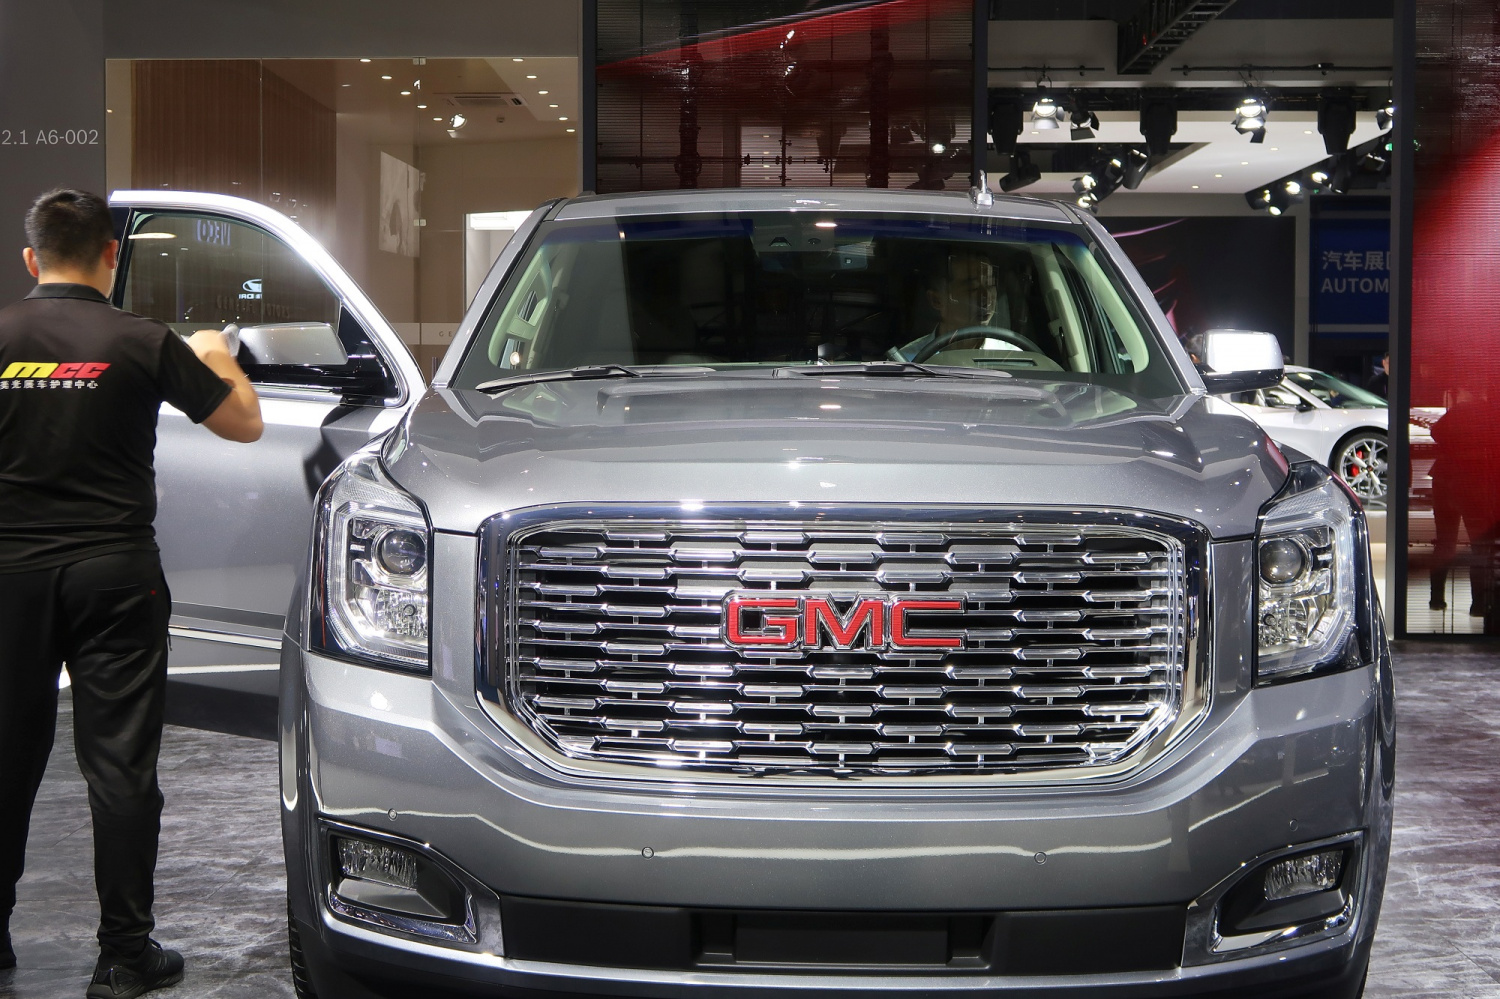 GM Incurred 800 Million Loss For Second Quarter After Pandemic Hit Sales